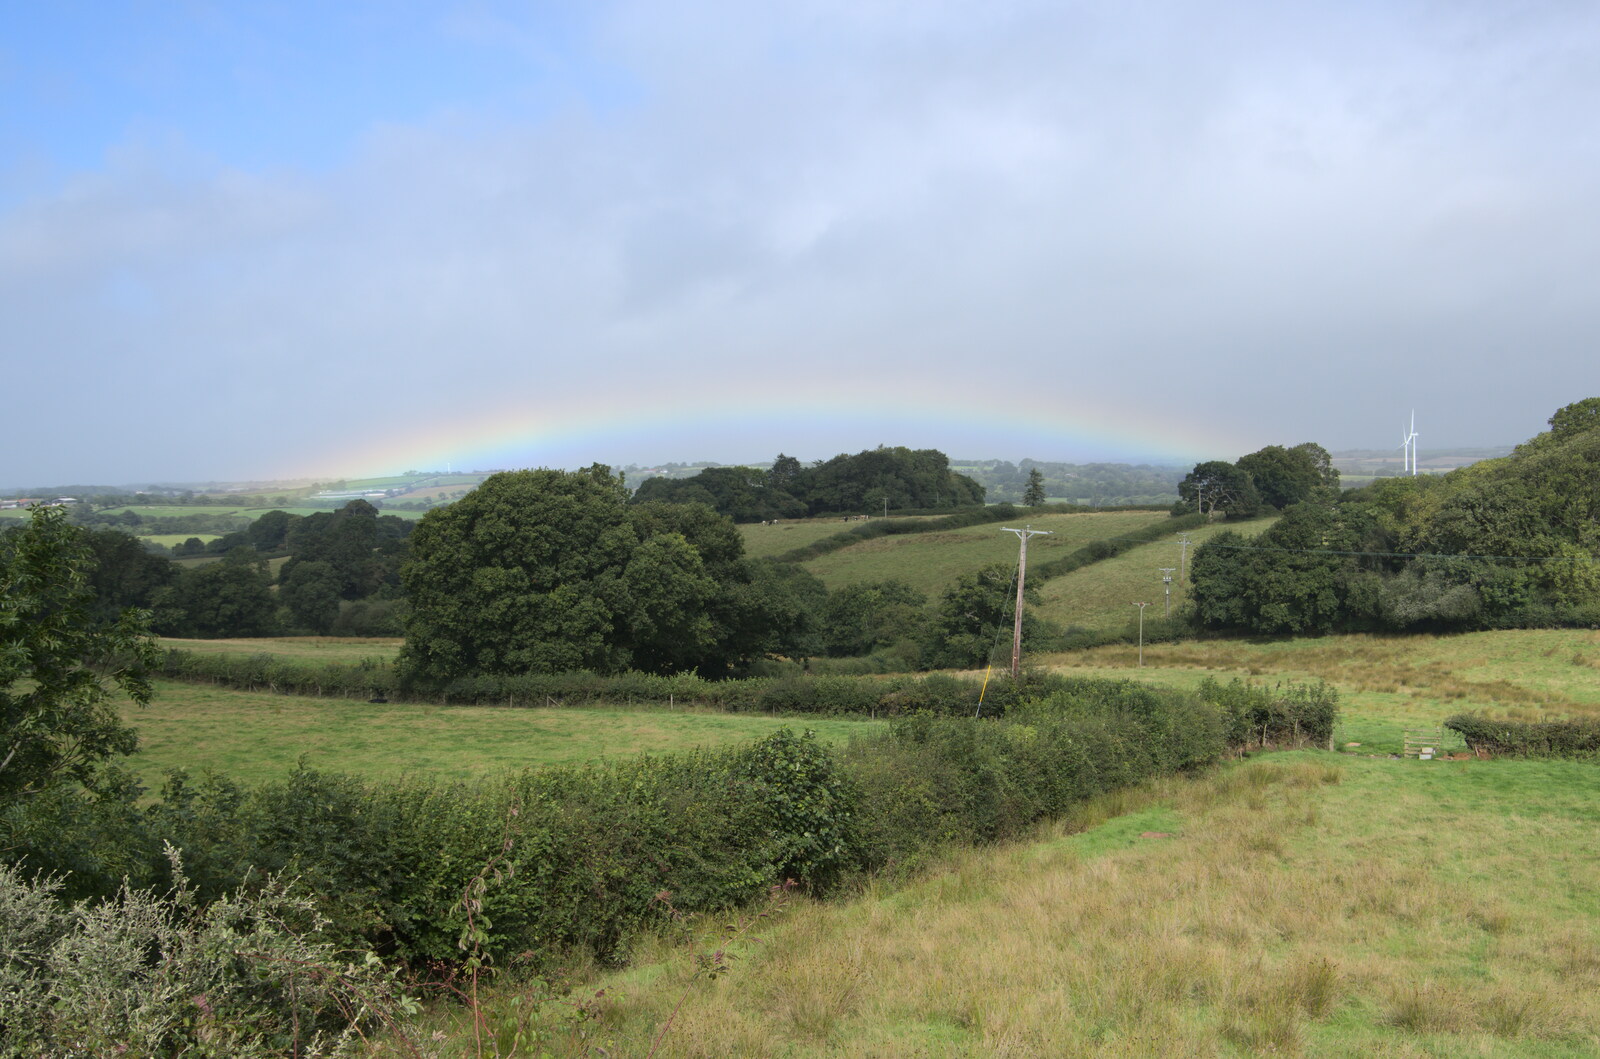 There's a very low rainbow over the valley from A Walk up Hound Tor, Dartmoor, Devon - 24th August 2020